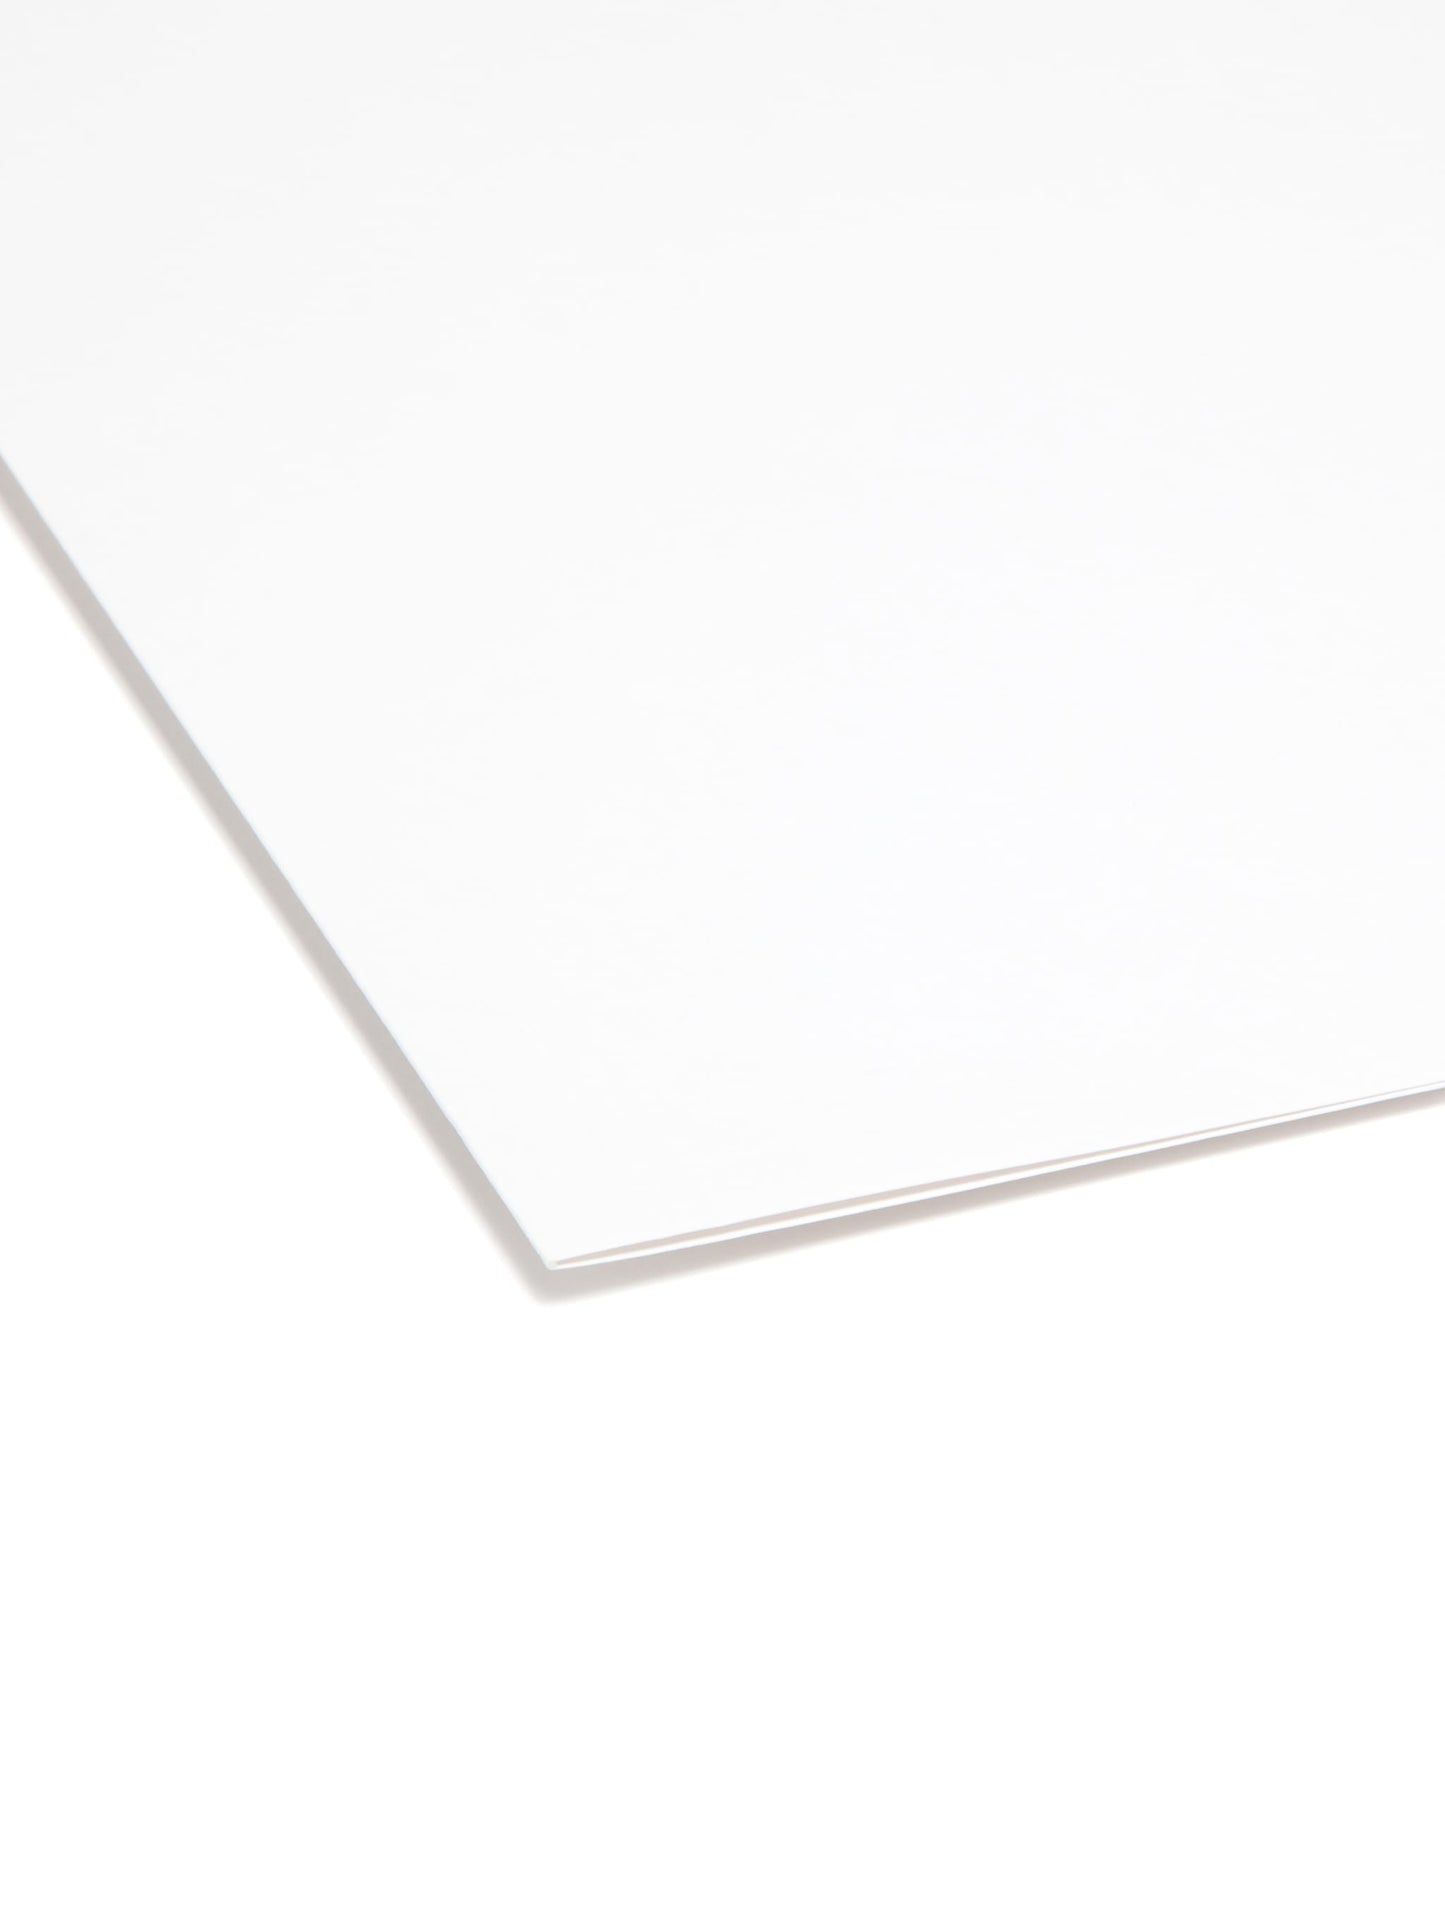 Reinforced Tab File Folders, 1/3-Cut Tab, White Color, Legal Size, Set of 100, 086486178341